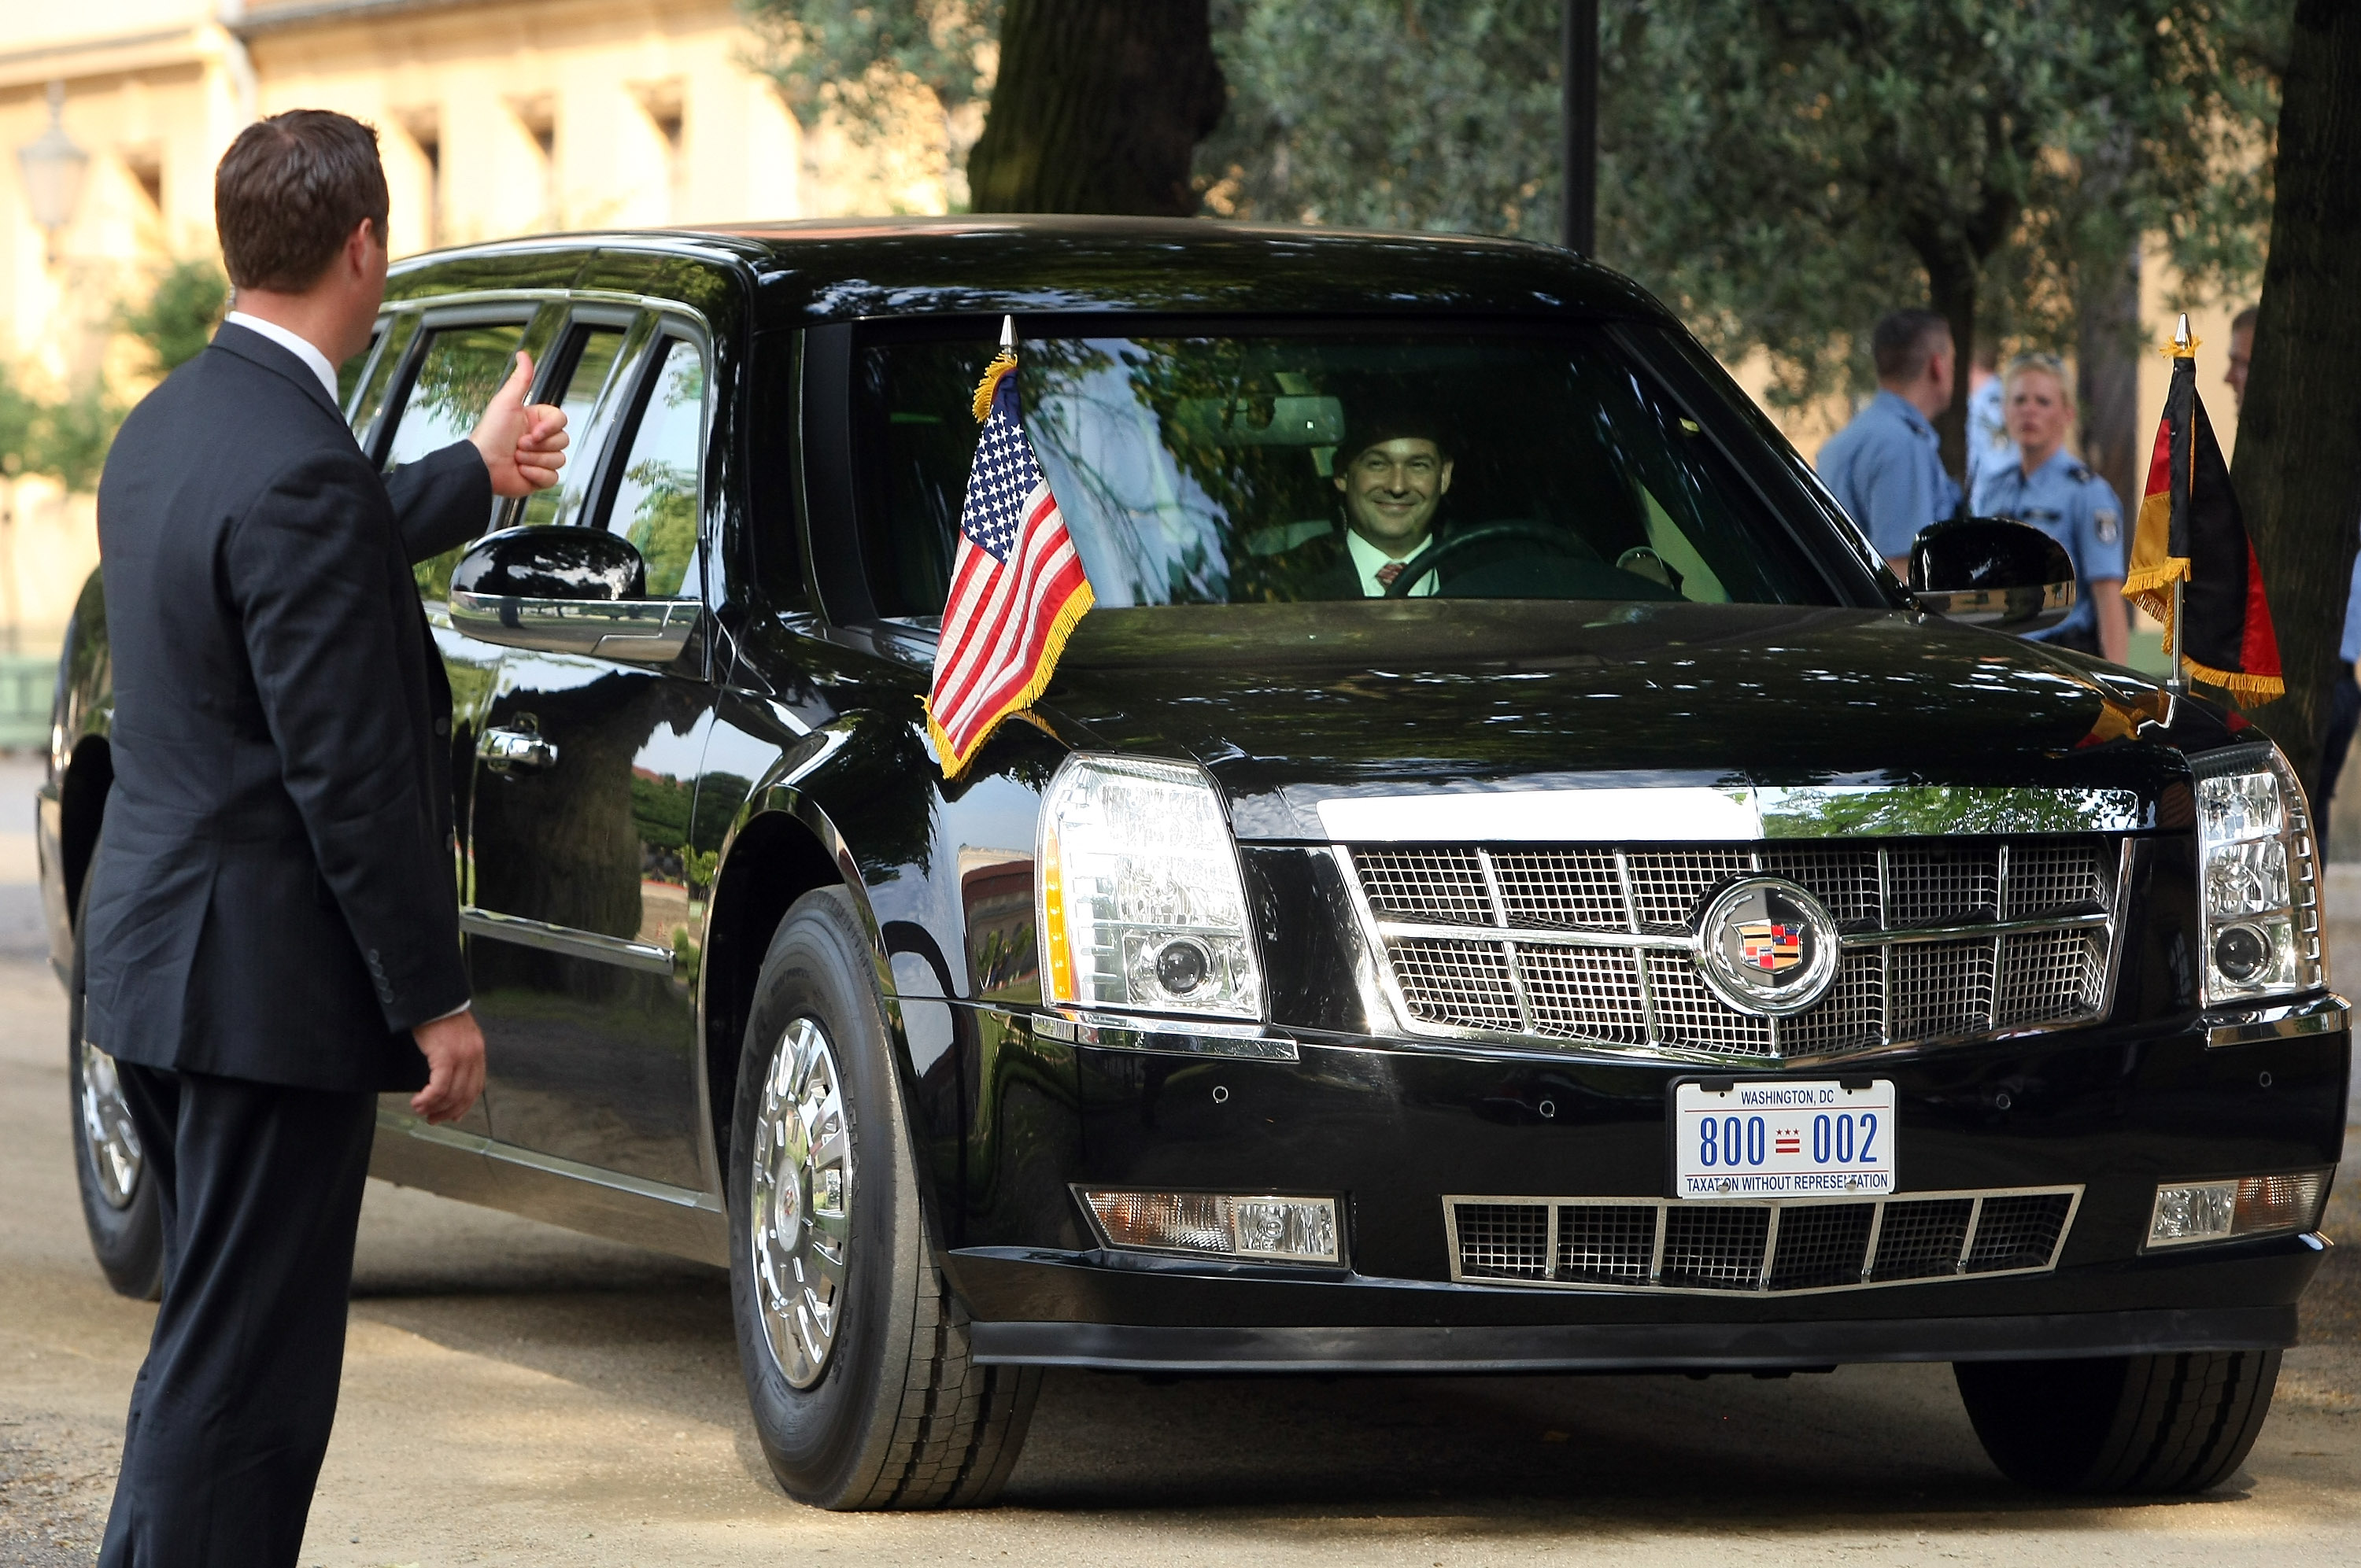 A security officer gives a thumbs-up to the driver of 'The Beast,' a modified Cadillac DTS that is the current U.S. presidential limousine, after U.S. President Barack Obama exited it for a dinner at the Orangerie at Schloss Charlottenburg palace on June 19, 2013 in Berlin.